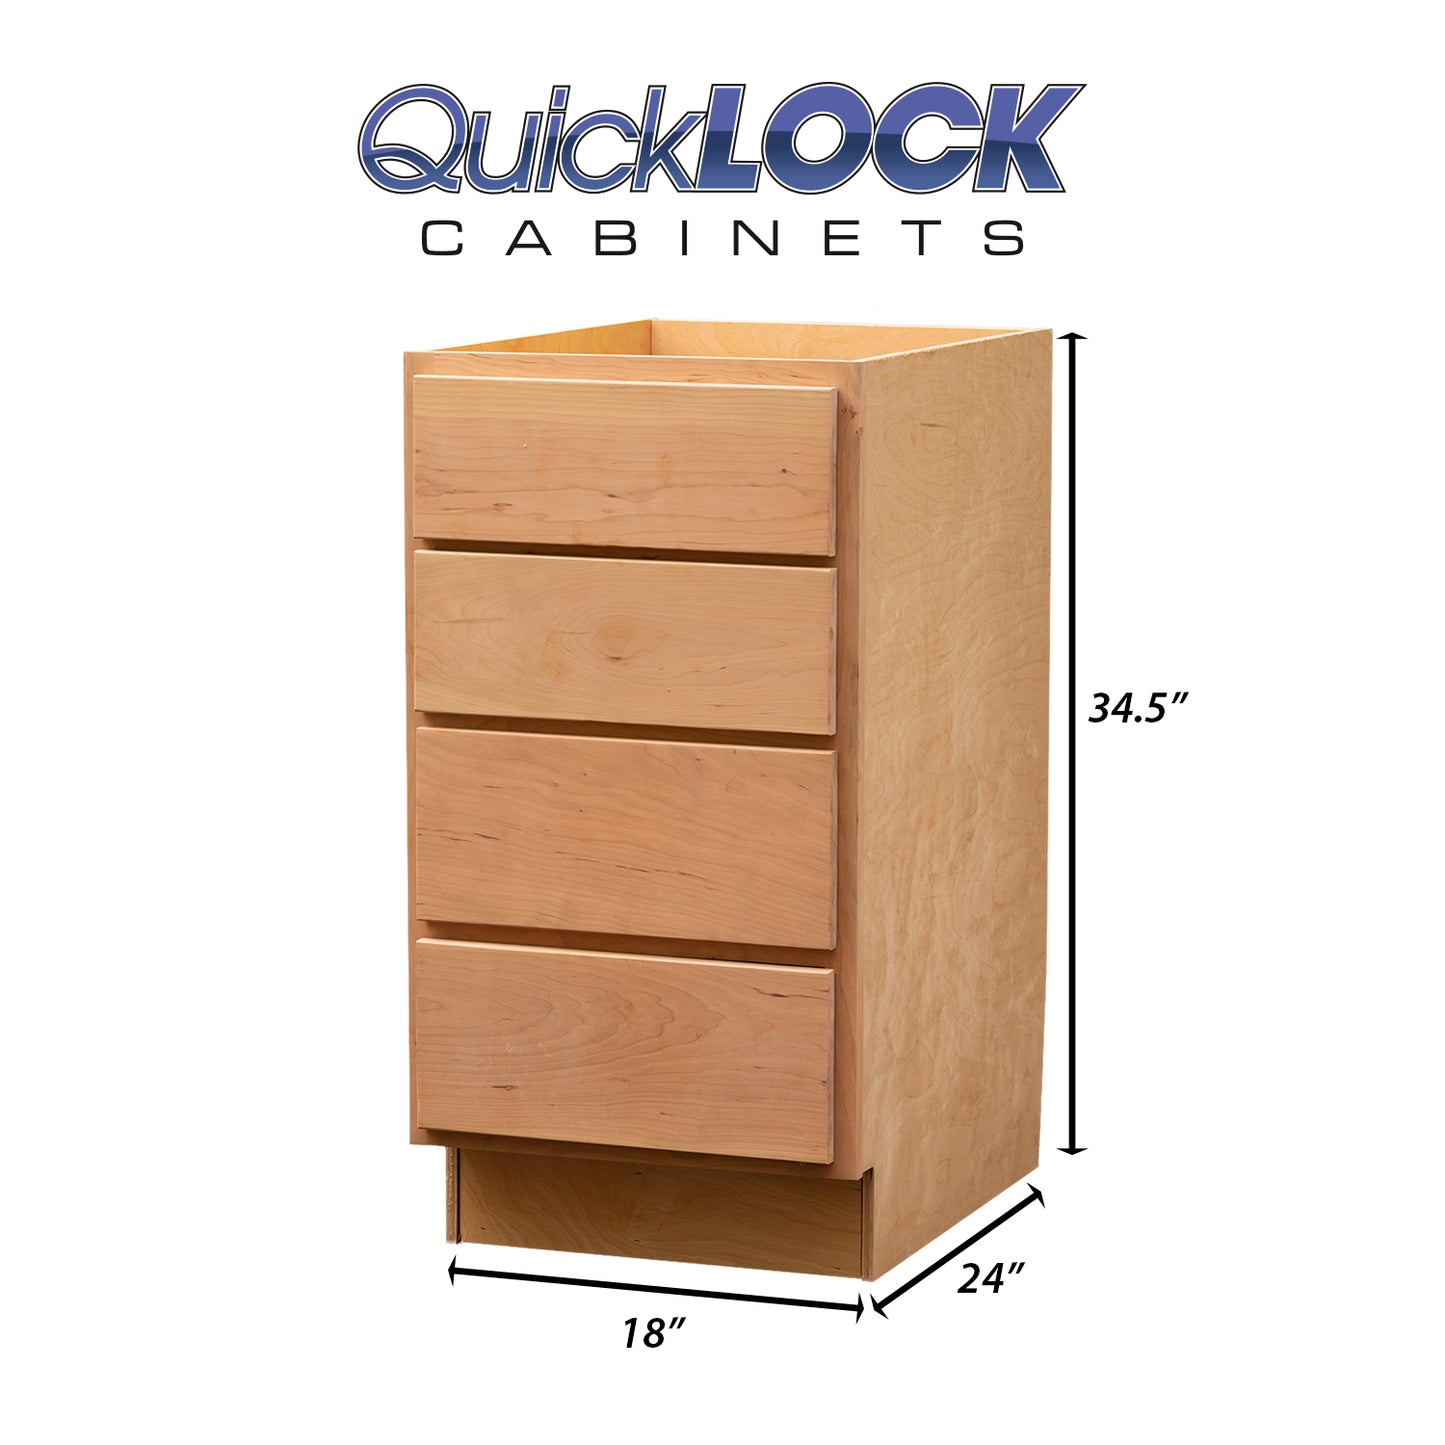 Quicklock RTA (Ready-to-Assemble) Raw Cherry Base Cabinet 4 Drawer - 18",  24"  W